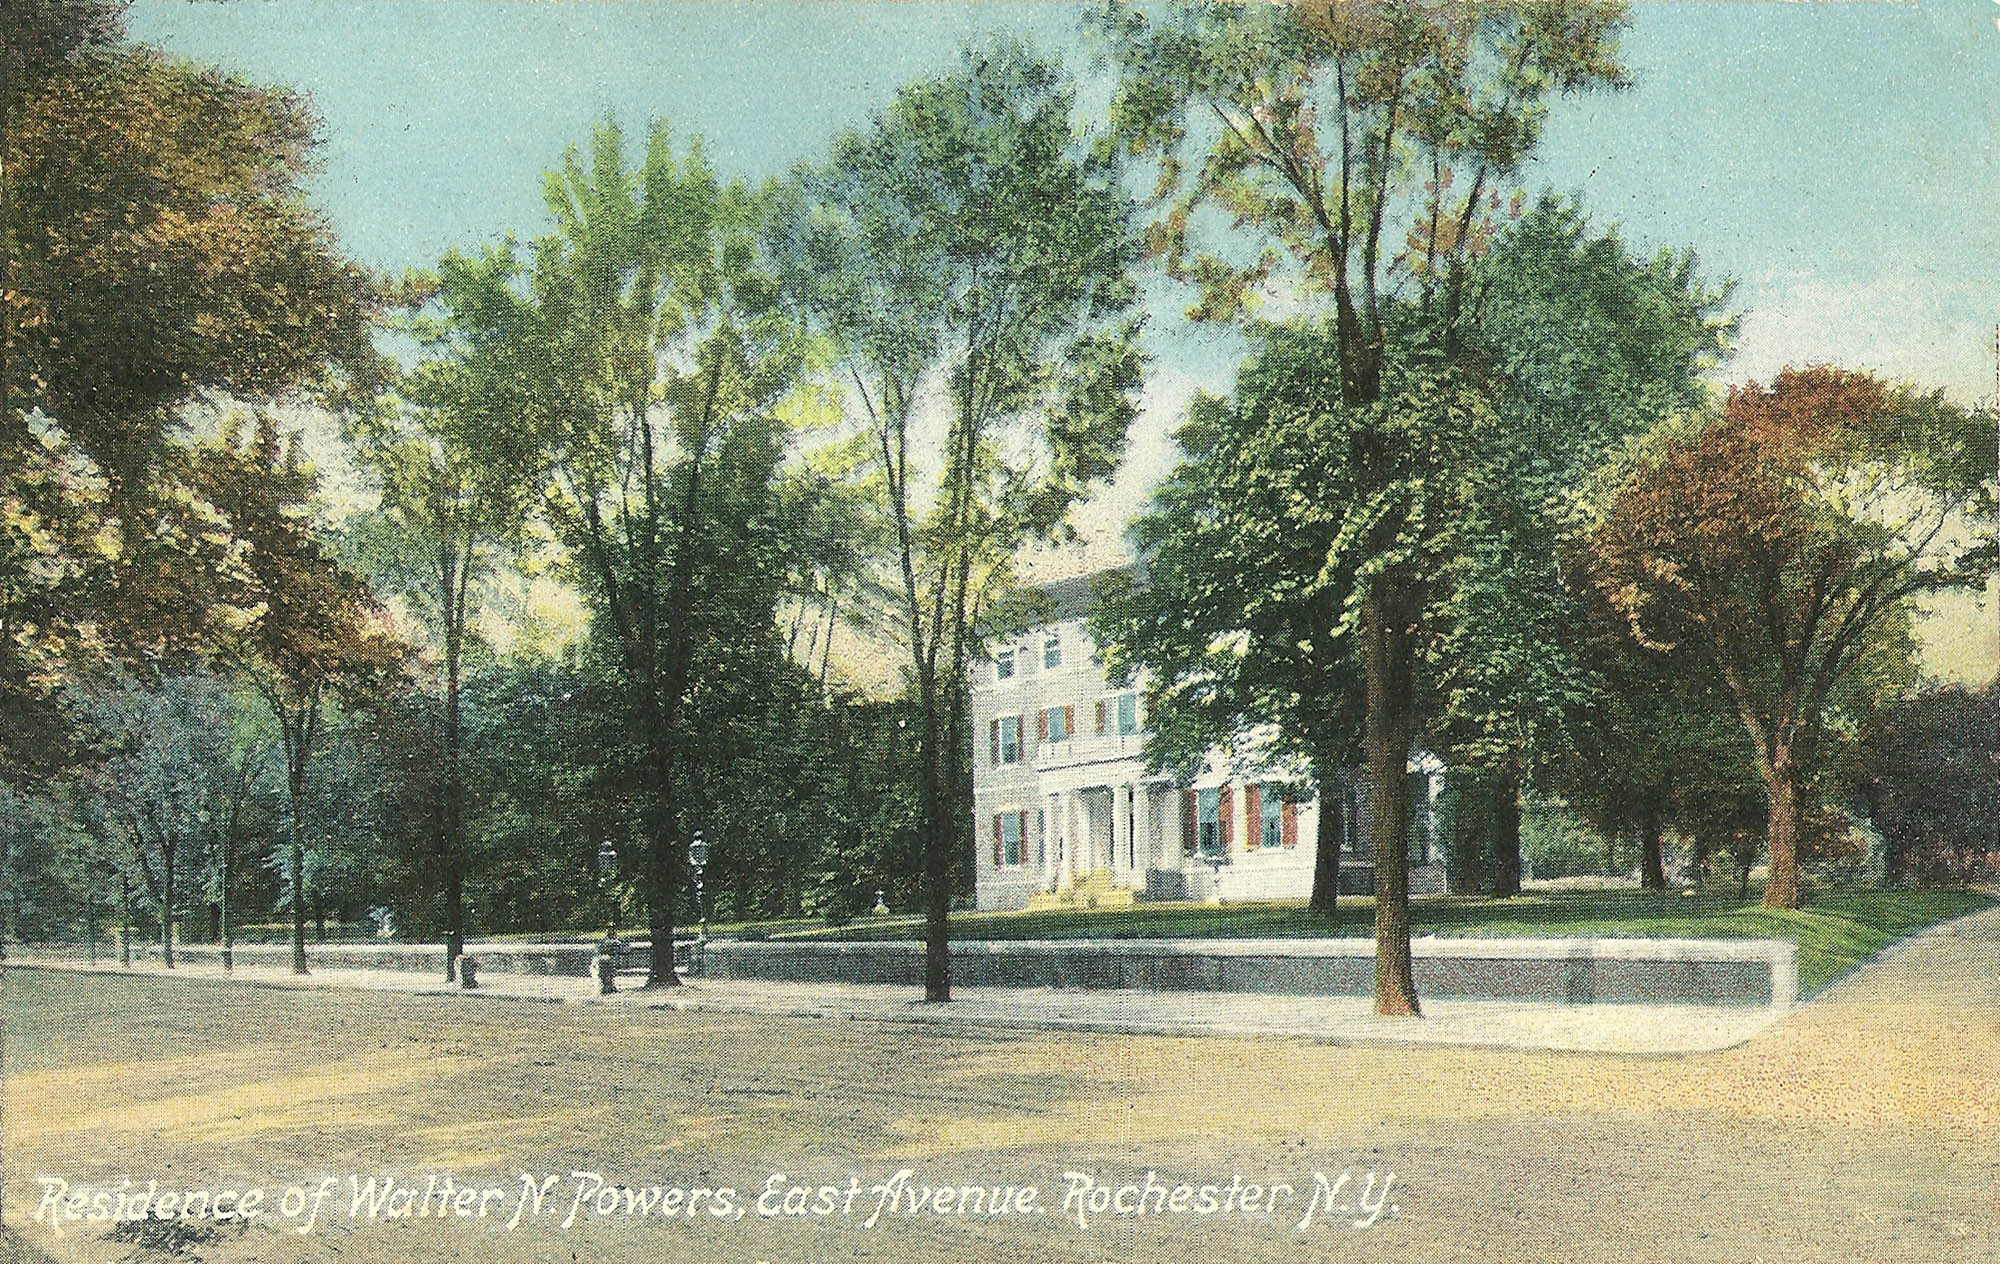 Powers residence, East Ave.